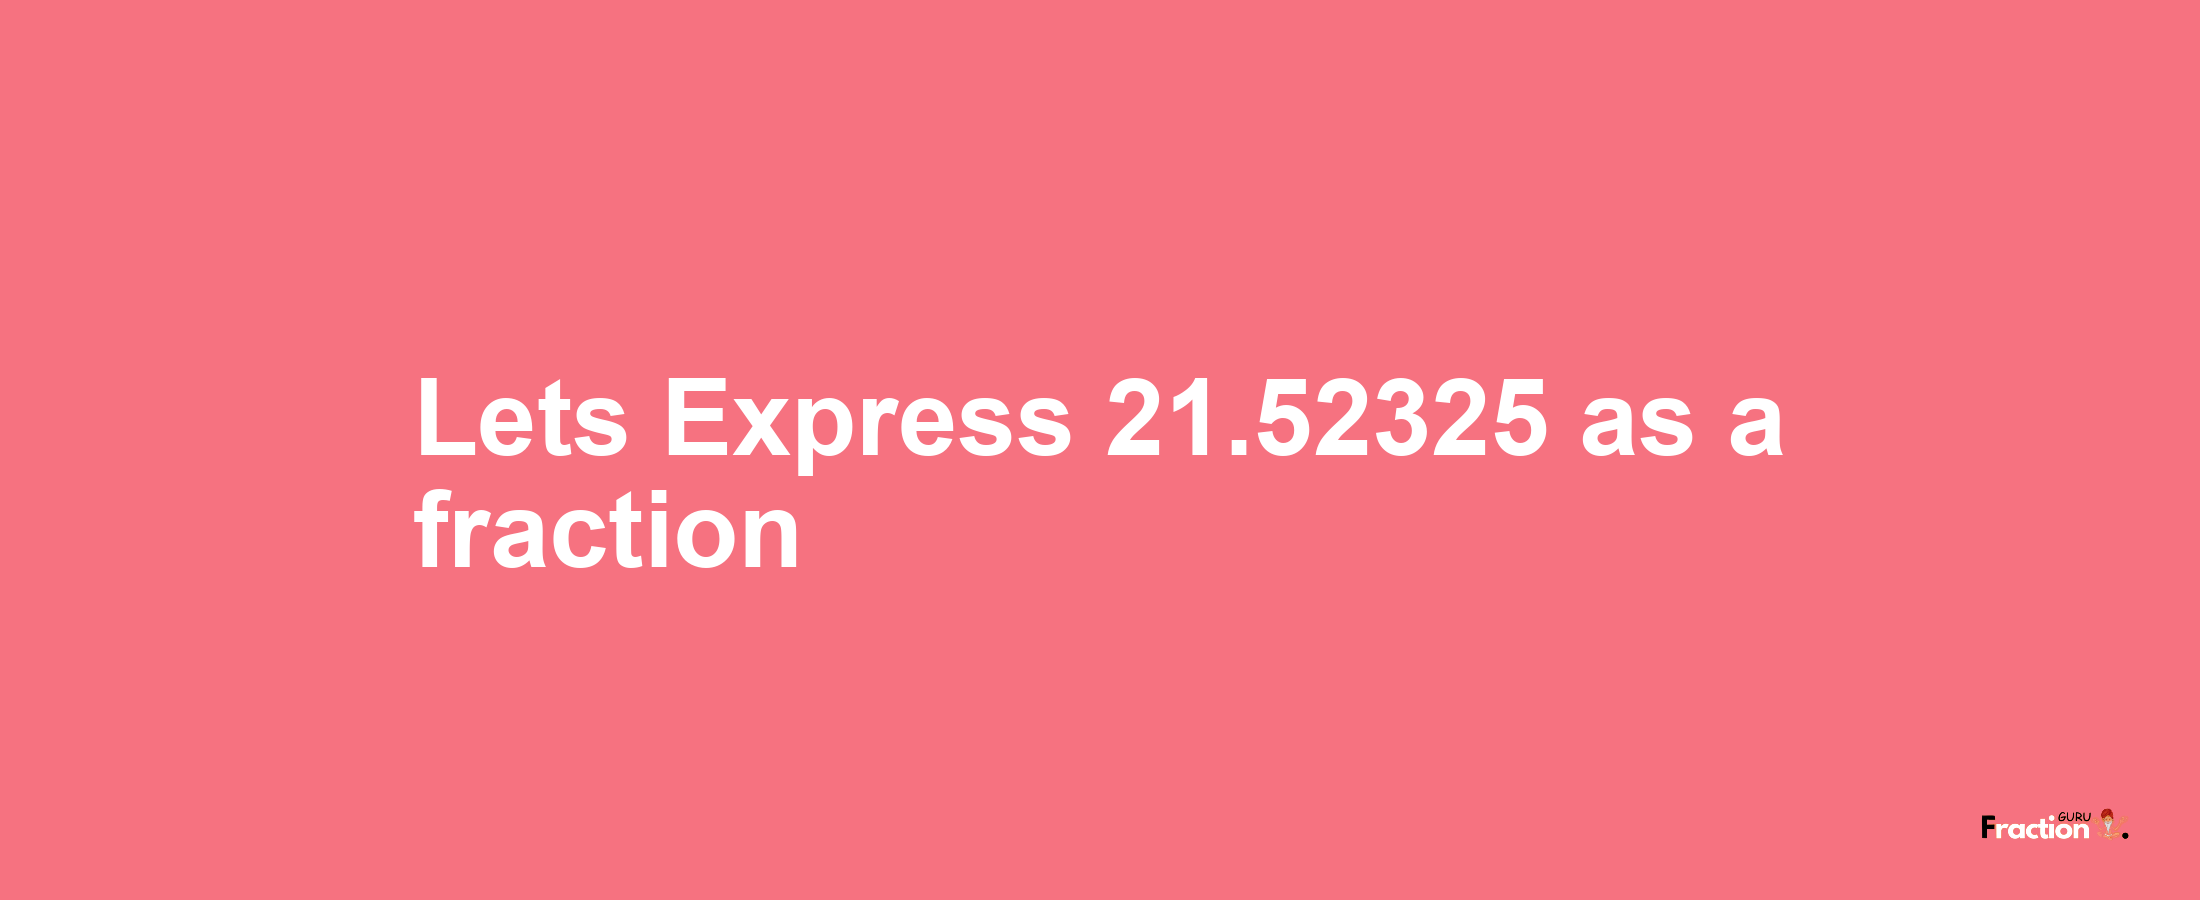 Lets Express 21.52325 as afraction